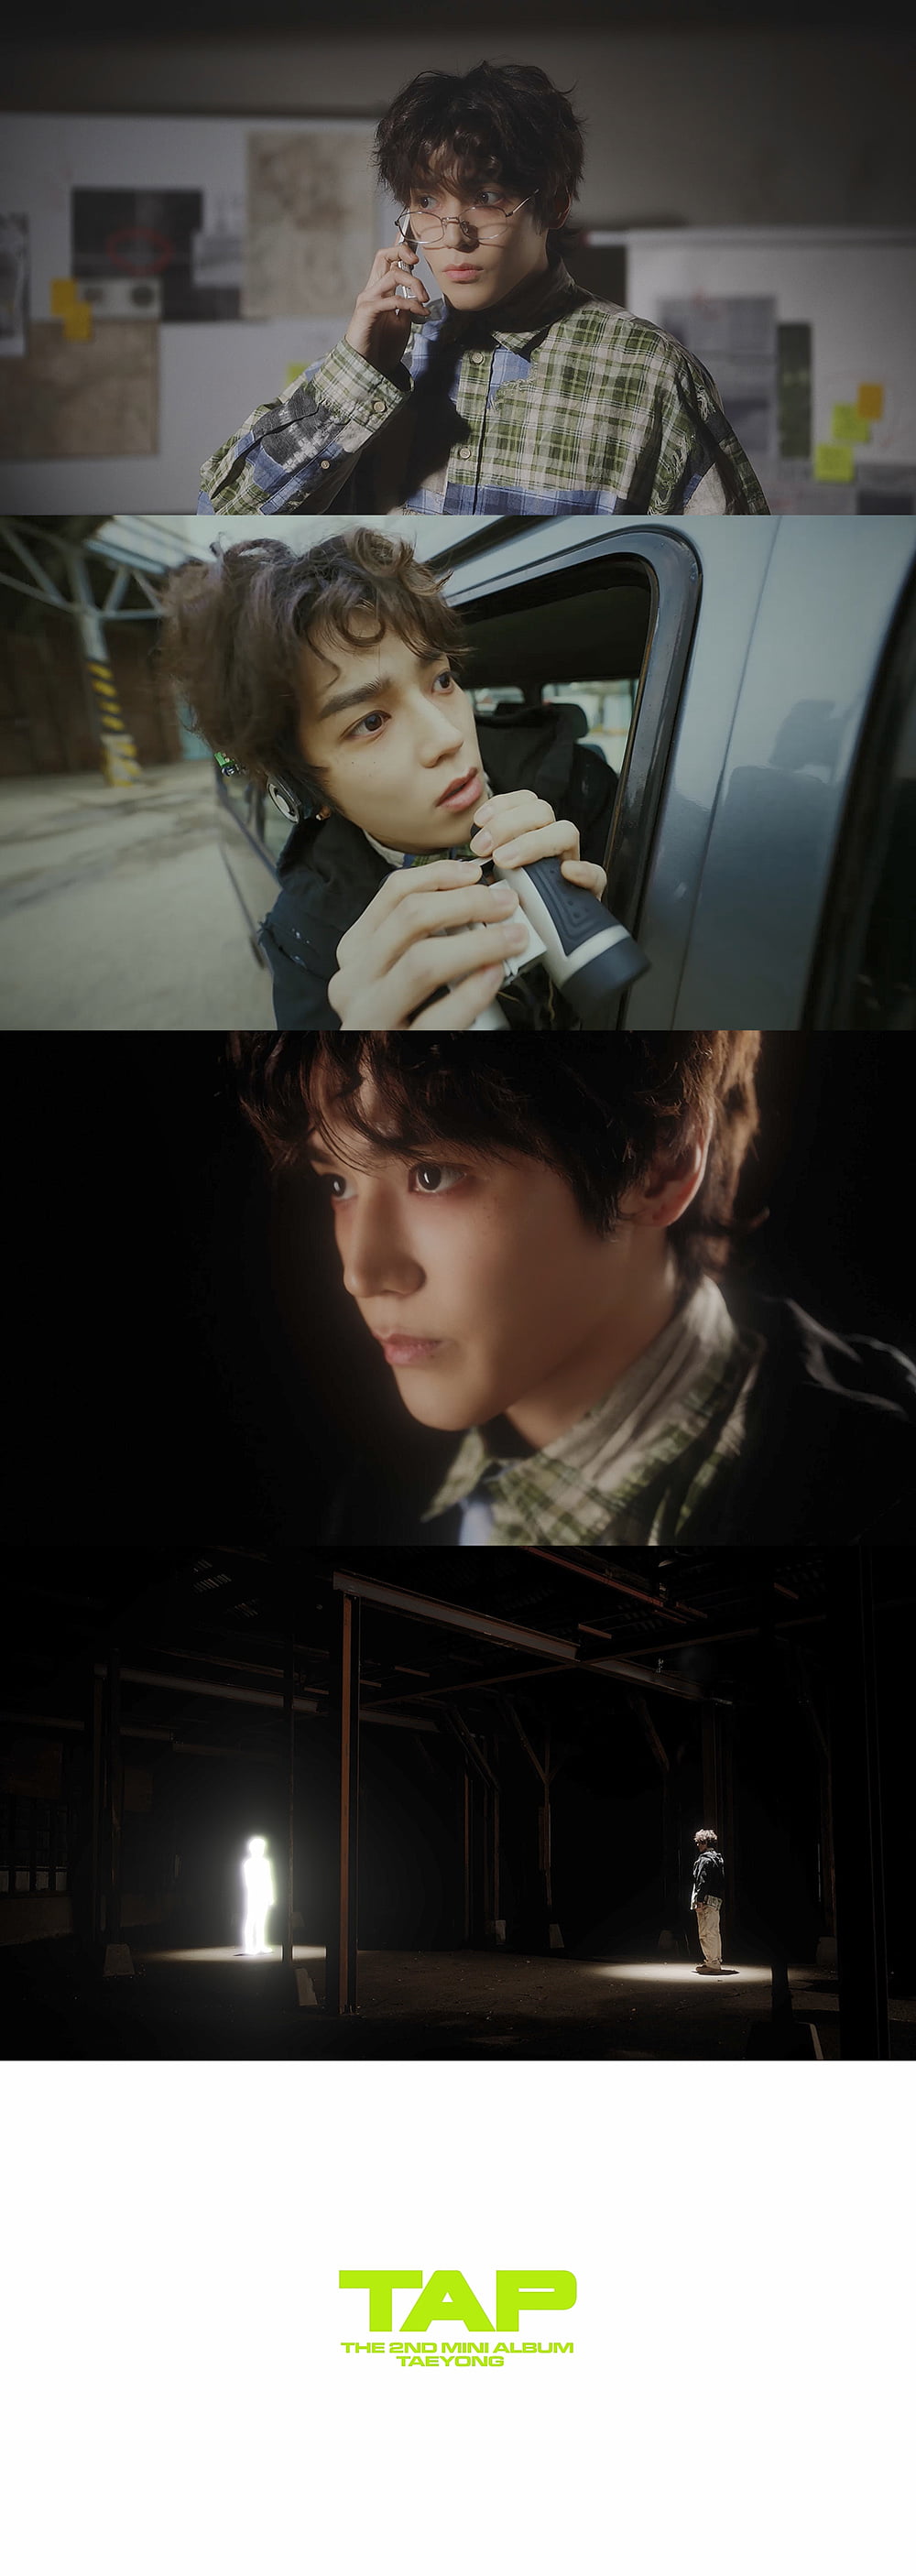 NCT Taeyong's second mini album 'TAP' trailer video released